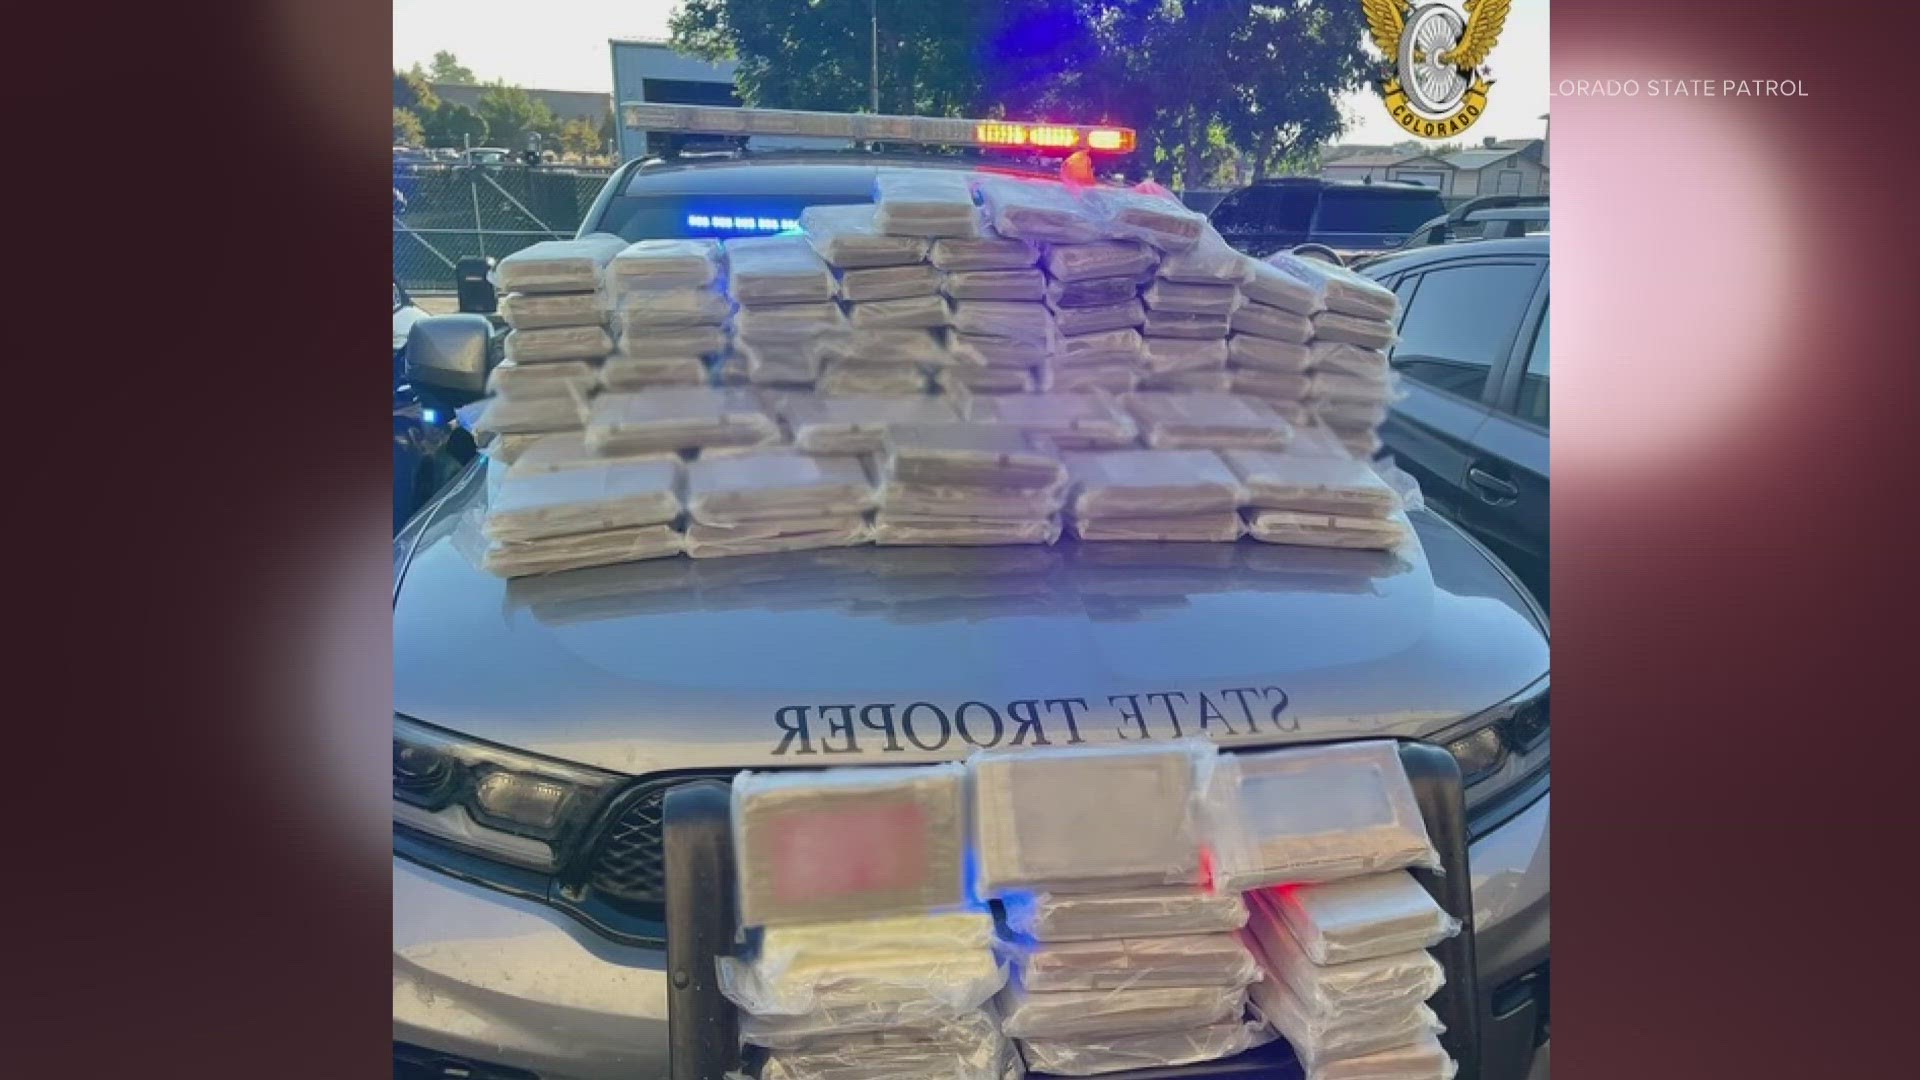 Two men were arrested on drug trafficking on Interstate 70 near Fruita after a trooper found cocaine in the car during a traffic stop.